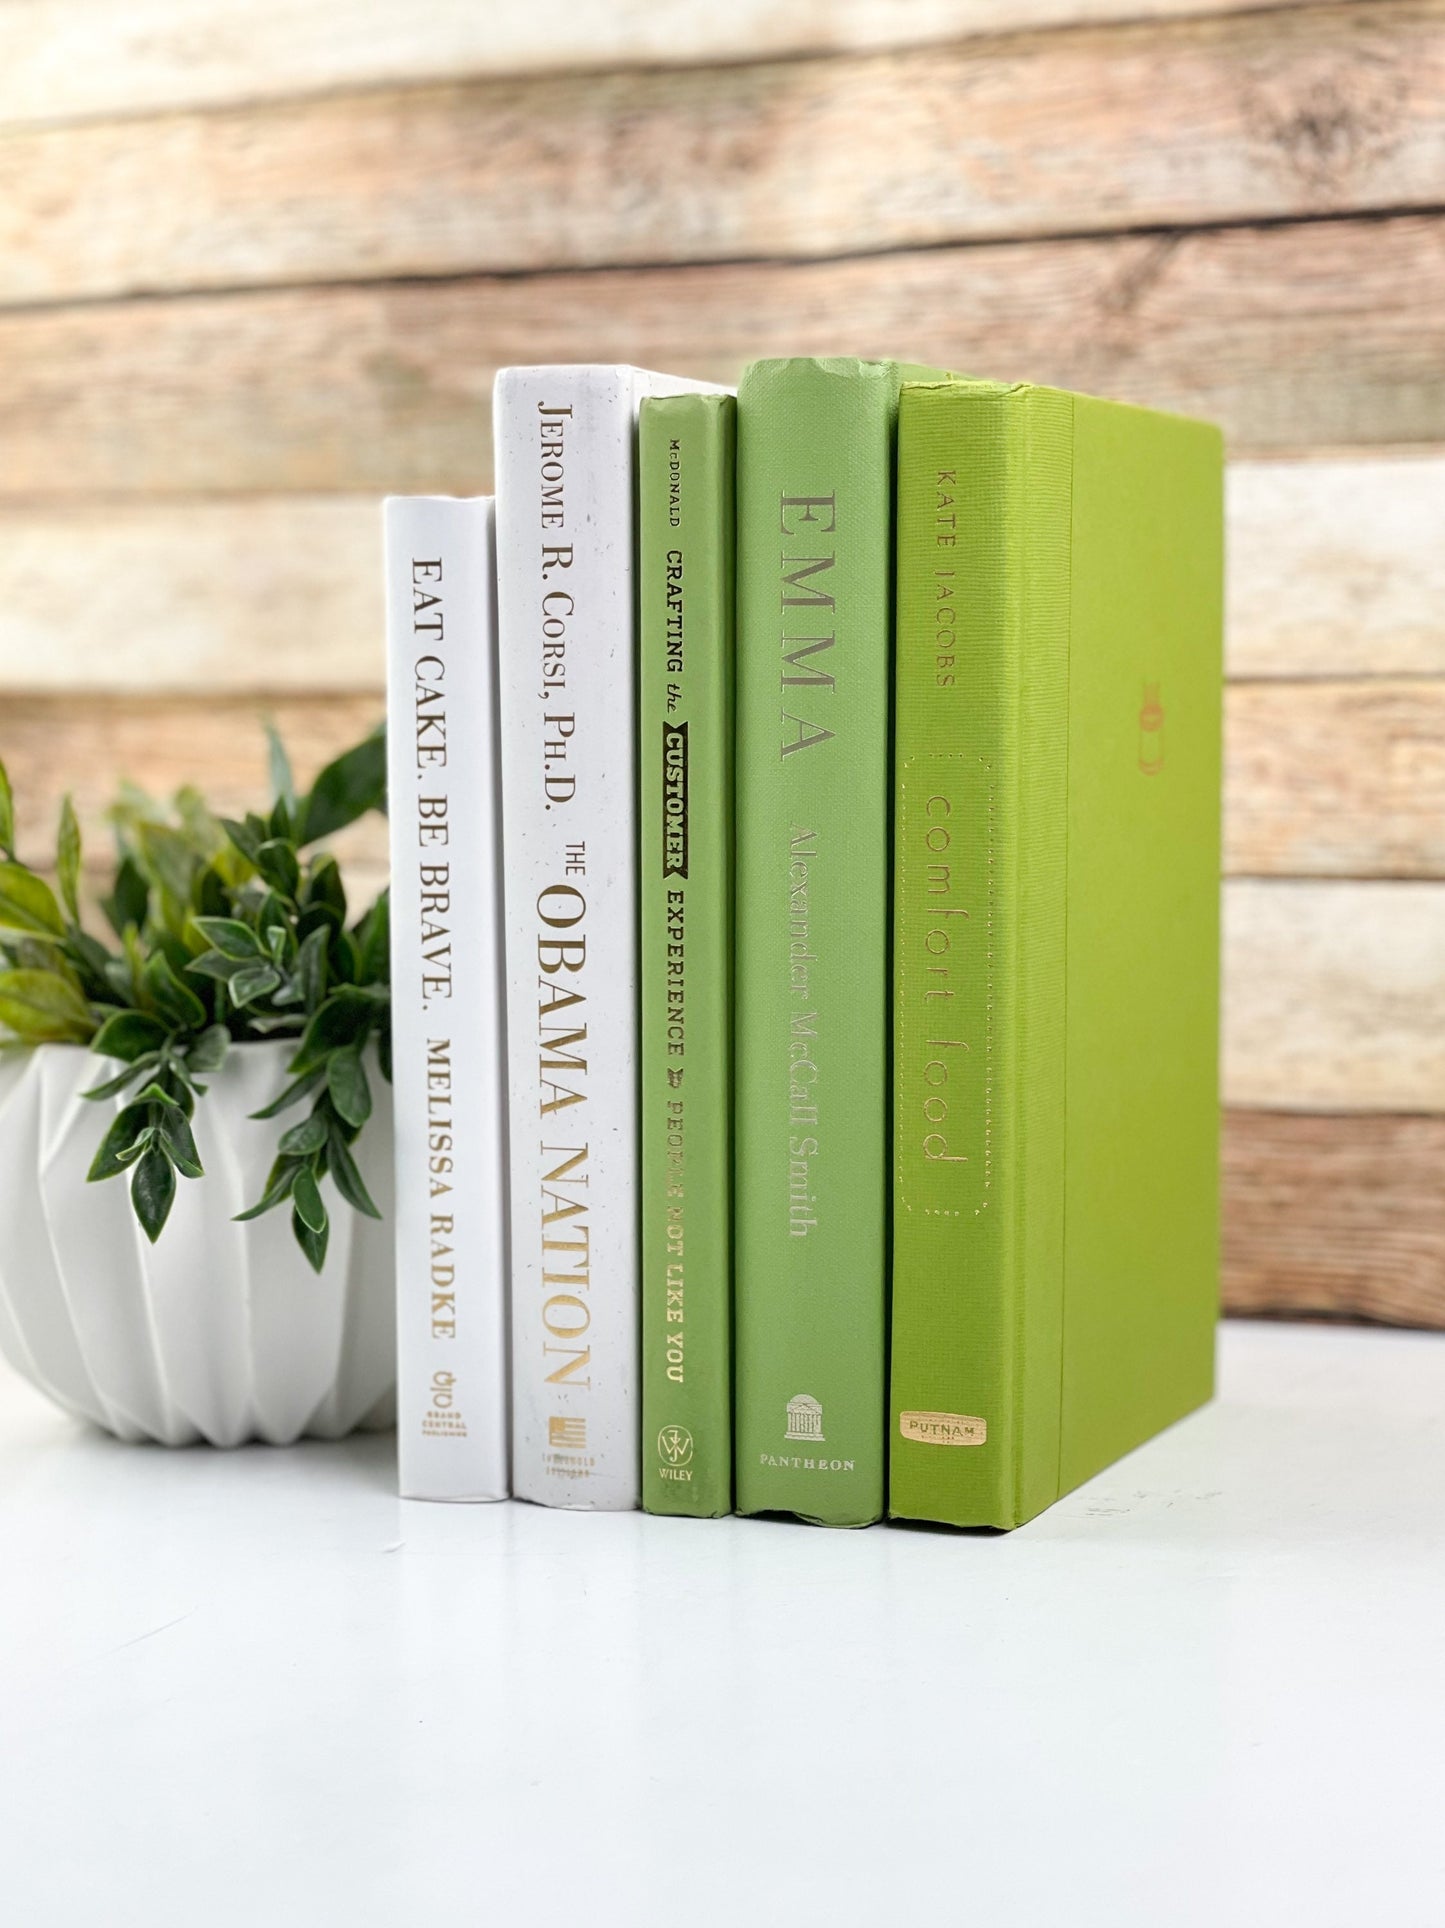 Green and White Books by the Foot